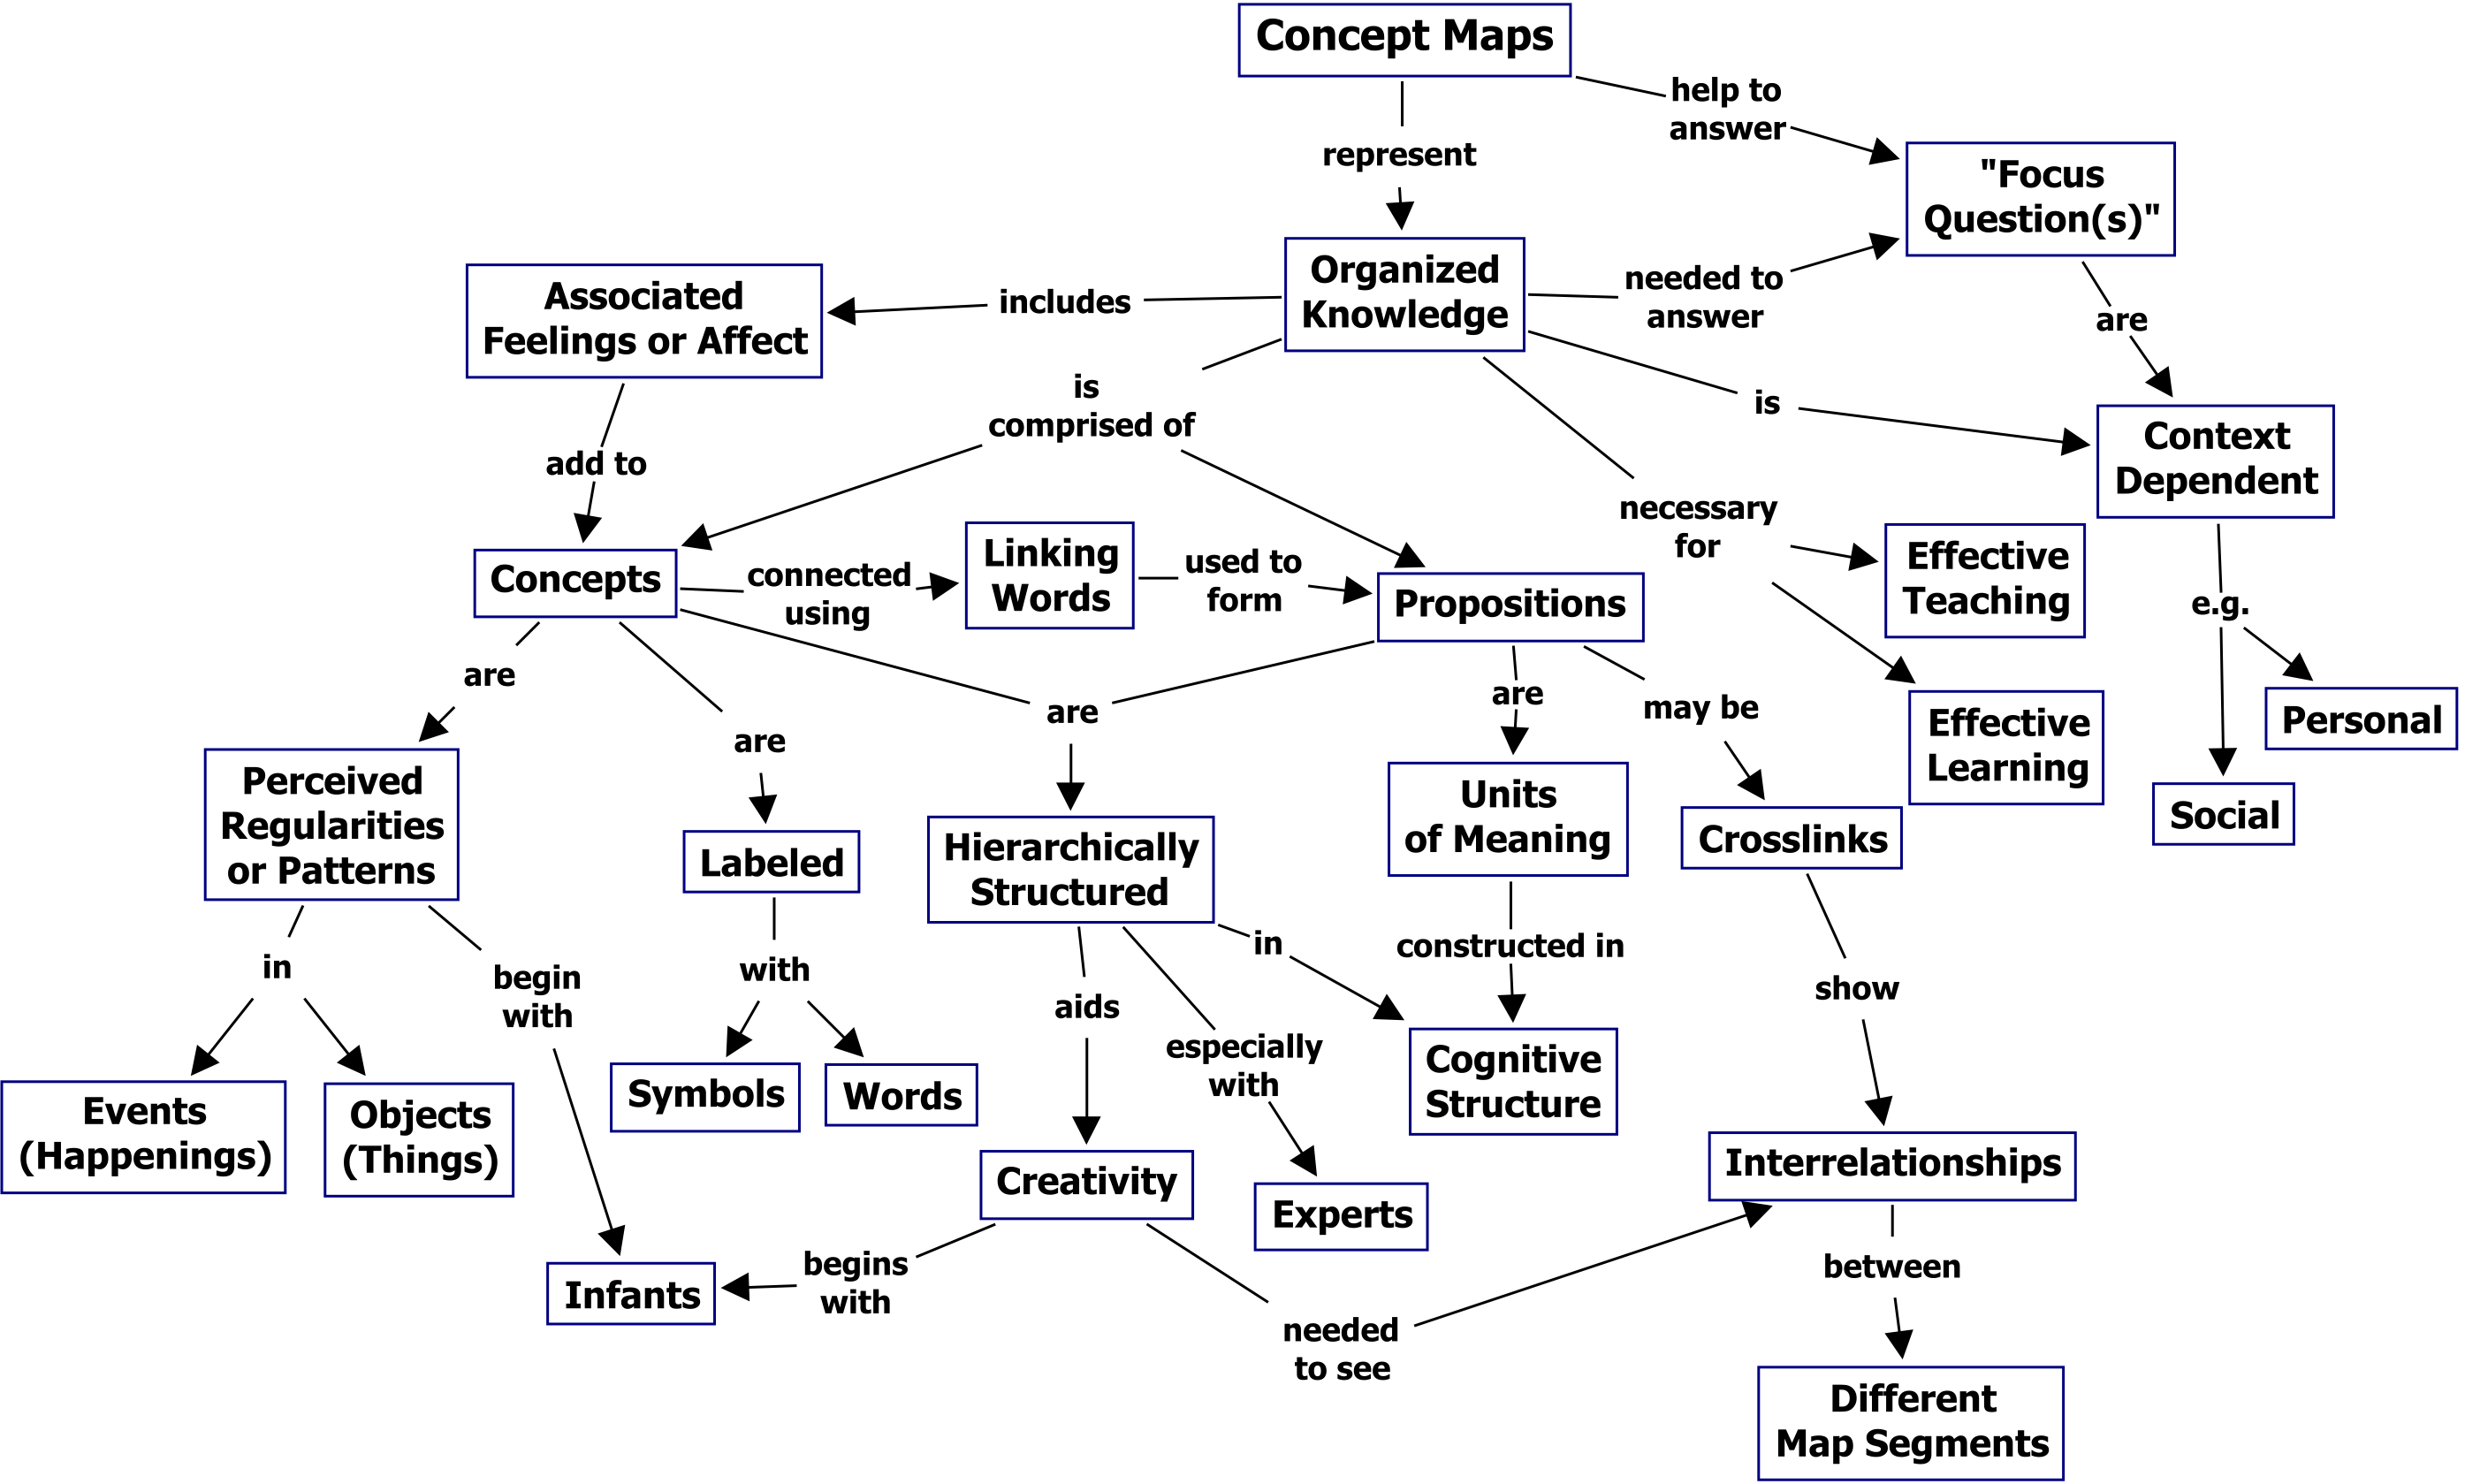 figure-1-a-concept-map-showing-the-key-features-of-concept-maps-3